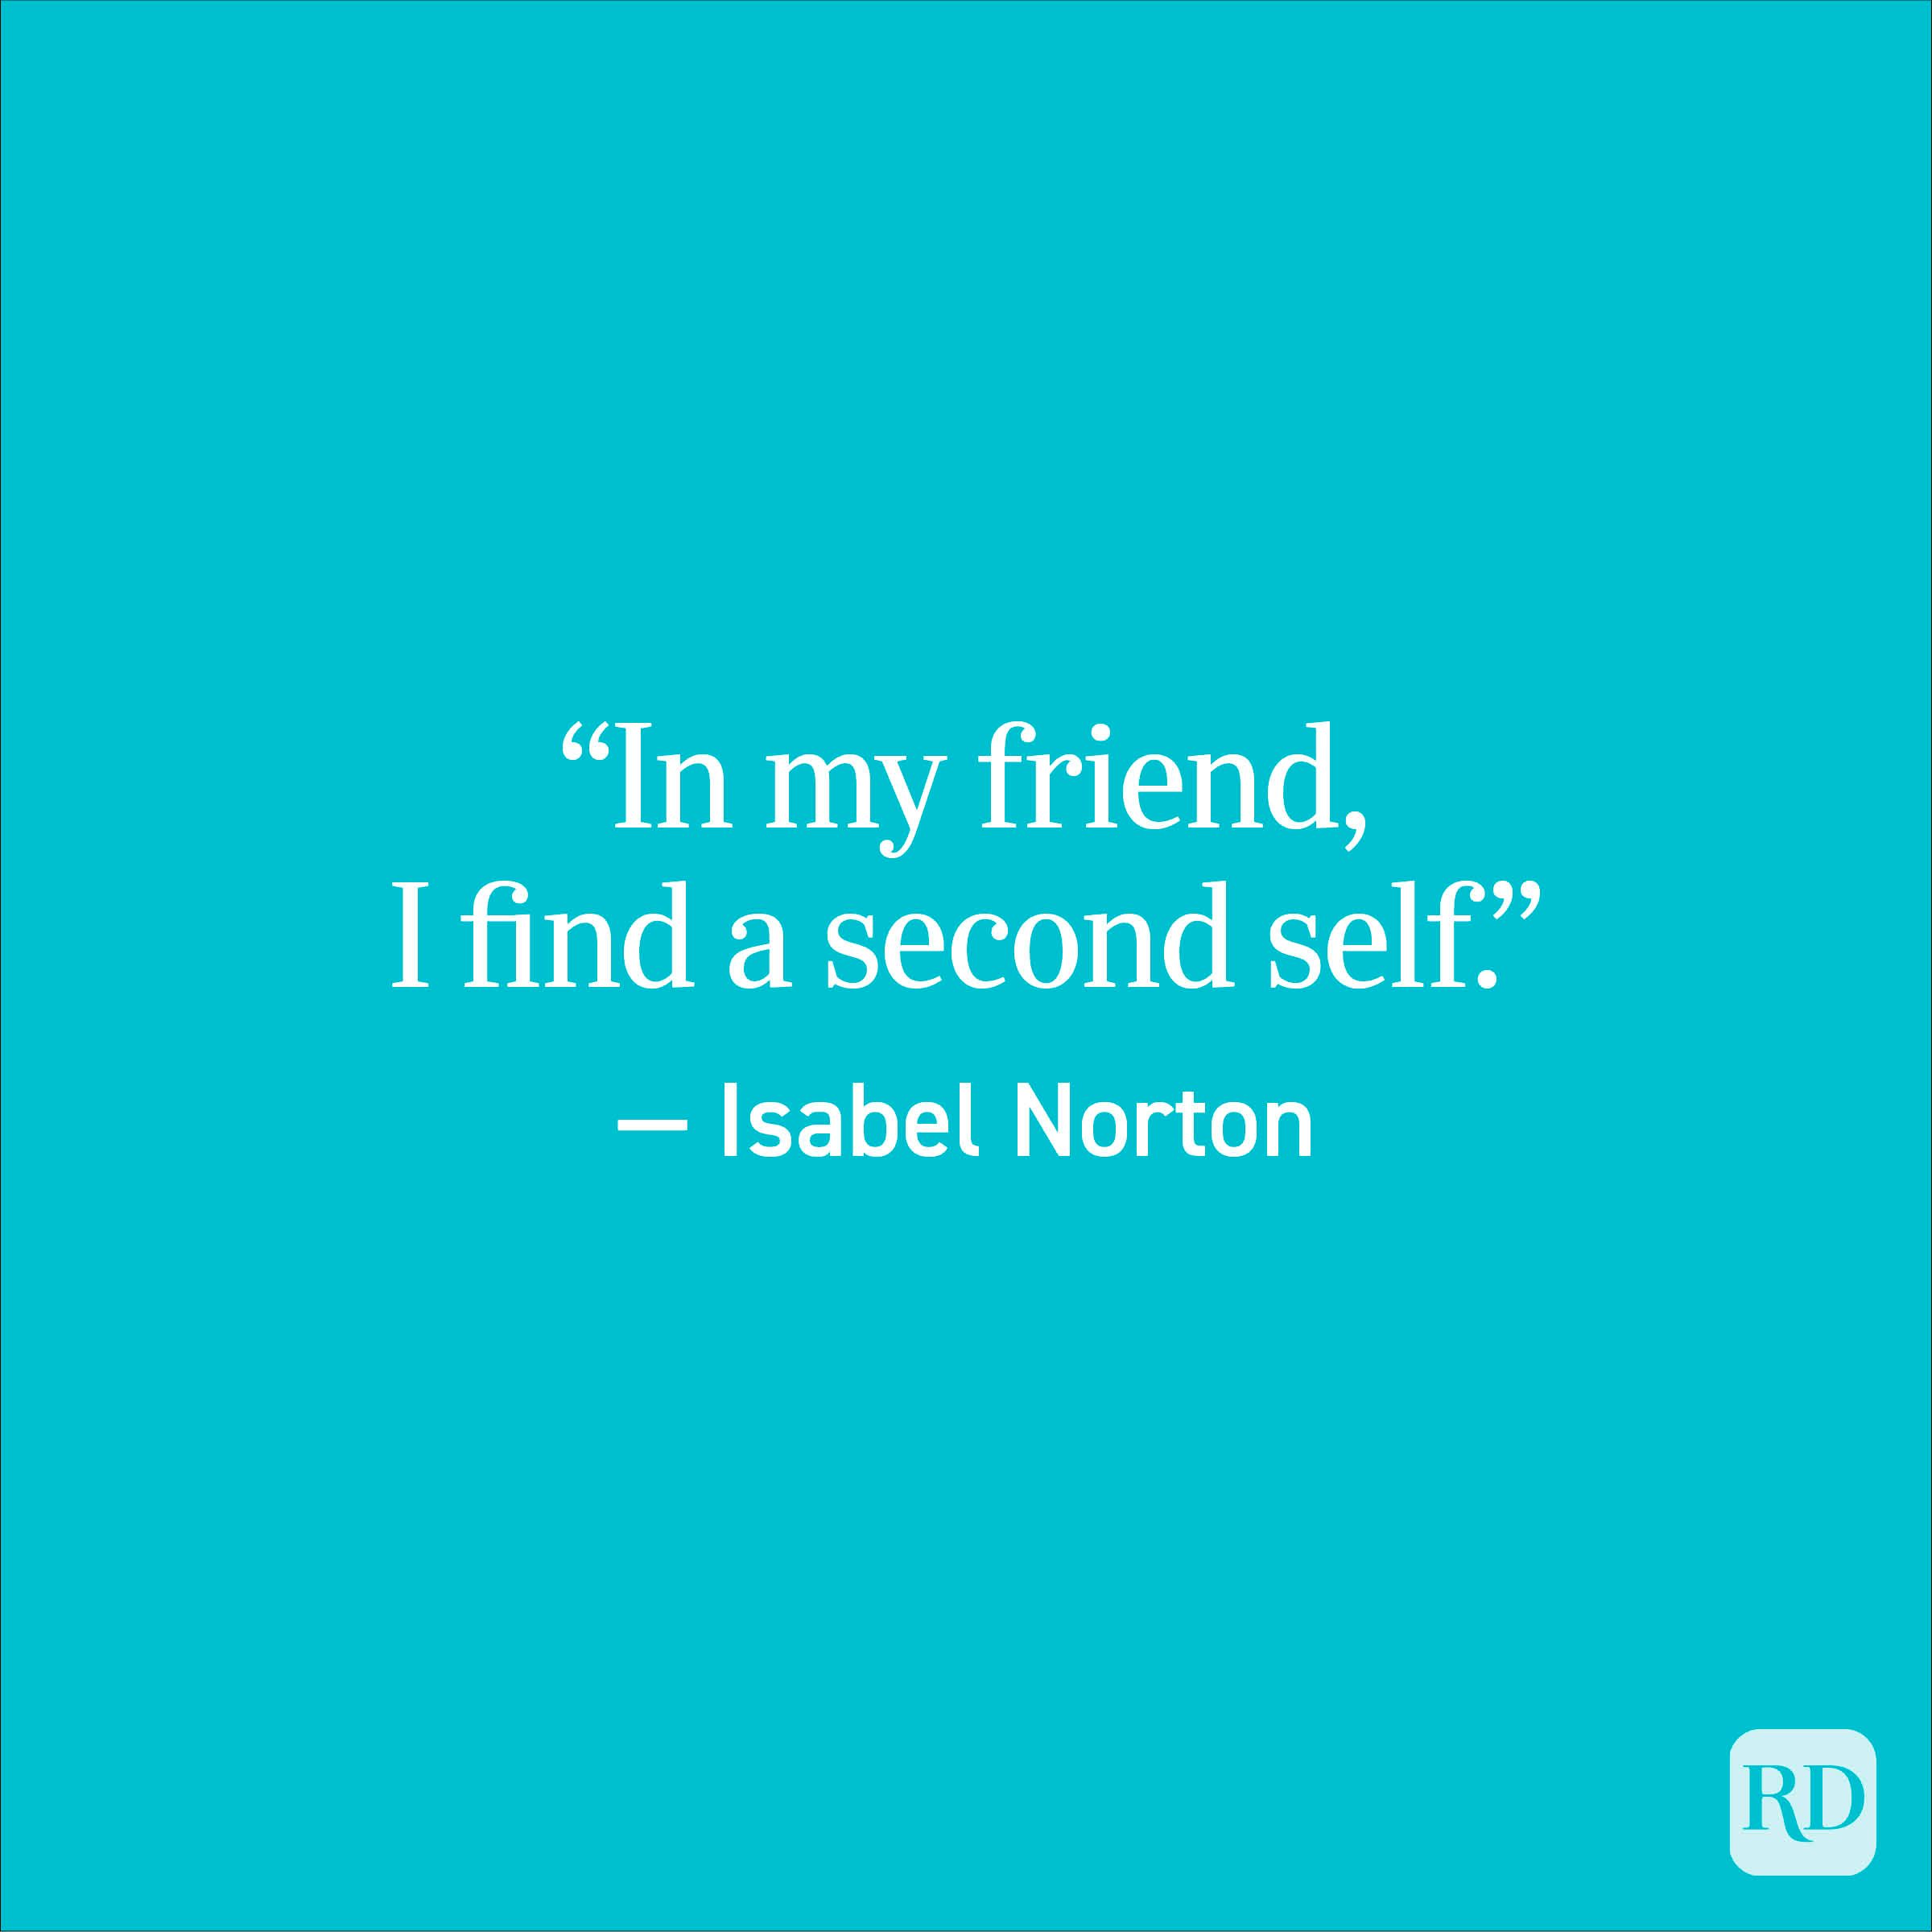 “In my friend, I find a second self.” — Isabel Norton